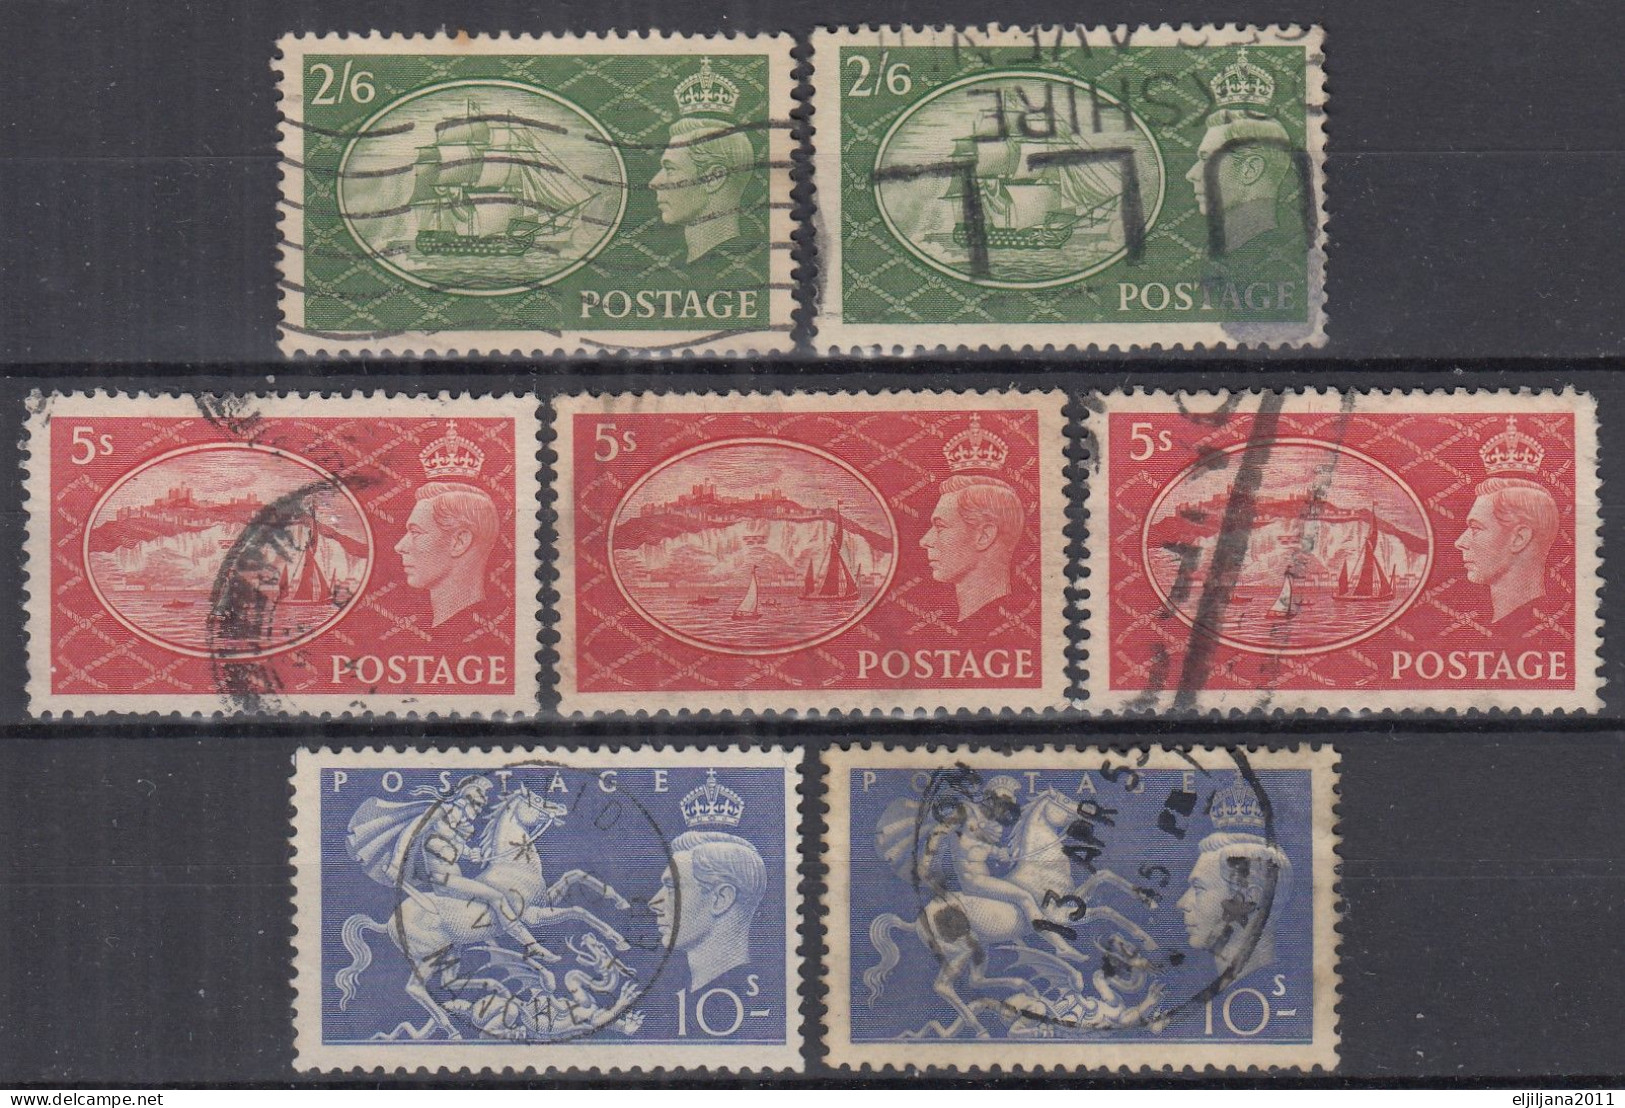 Great Britain GB / UK 1951 ⁕ Festival / King George VI. Mi.251-253 SG 509-511 ⁕ 7v Used - Unchecked - Used Stamps